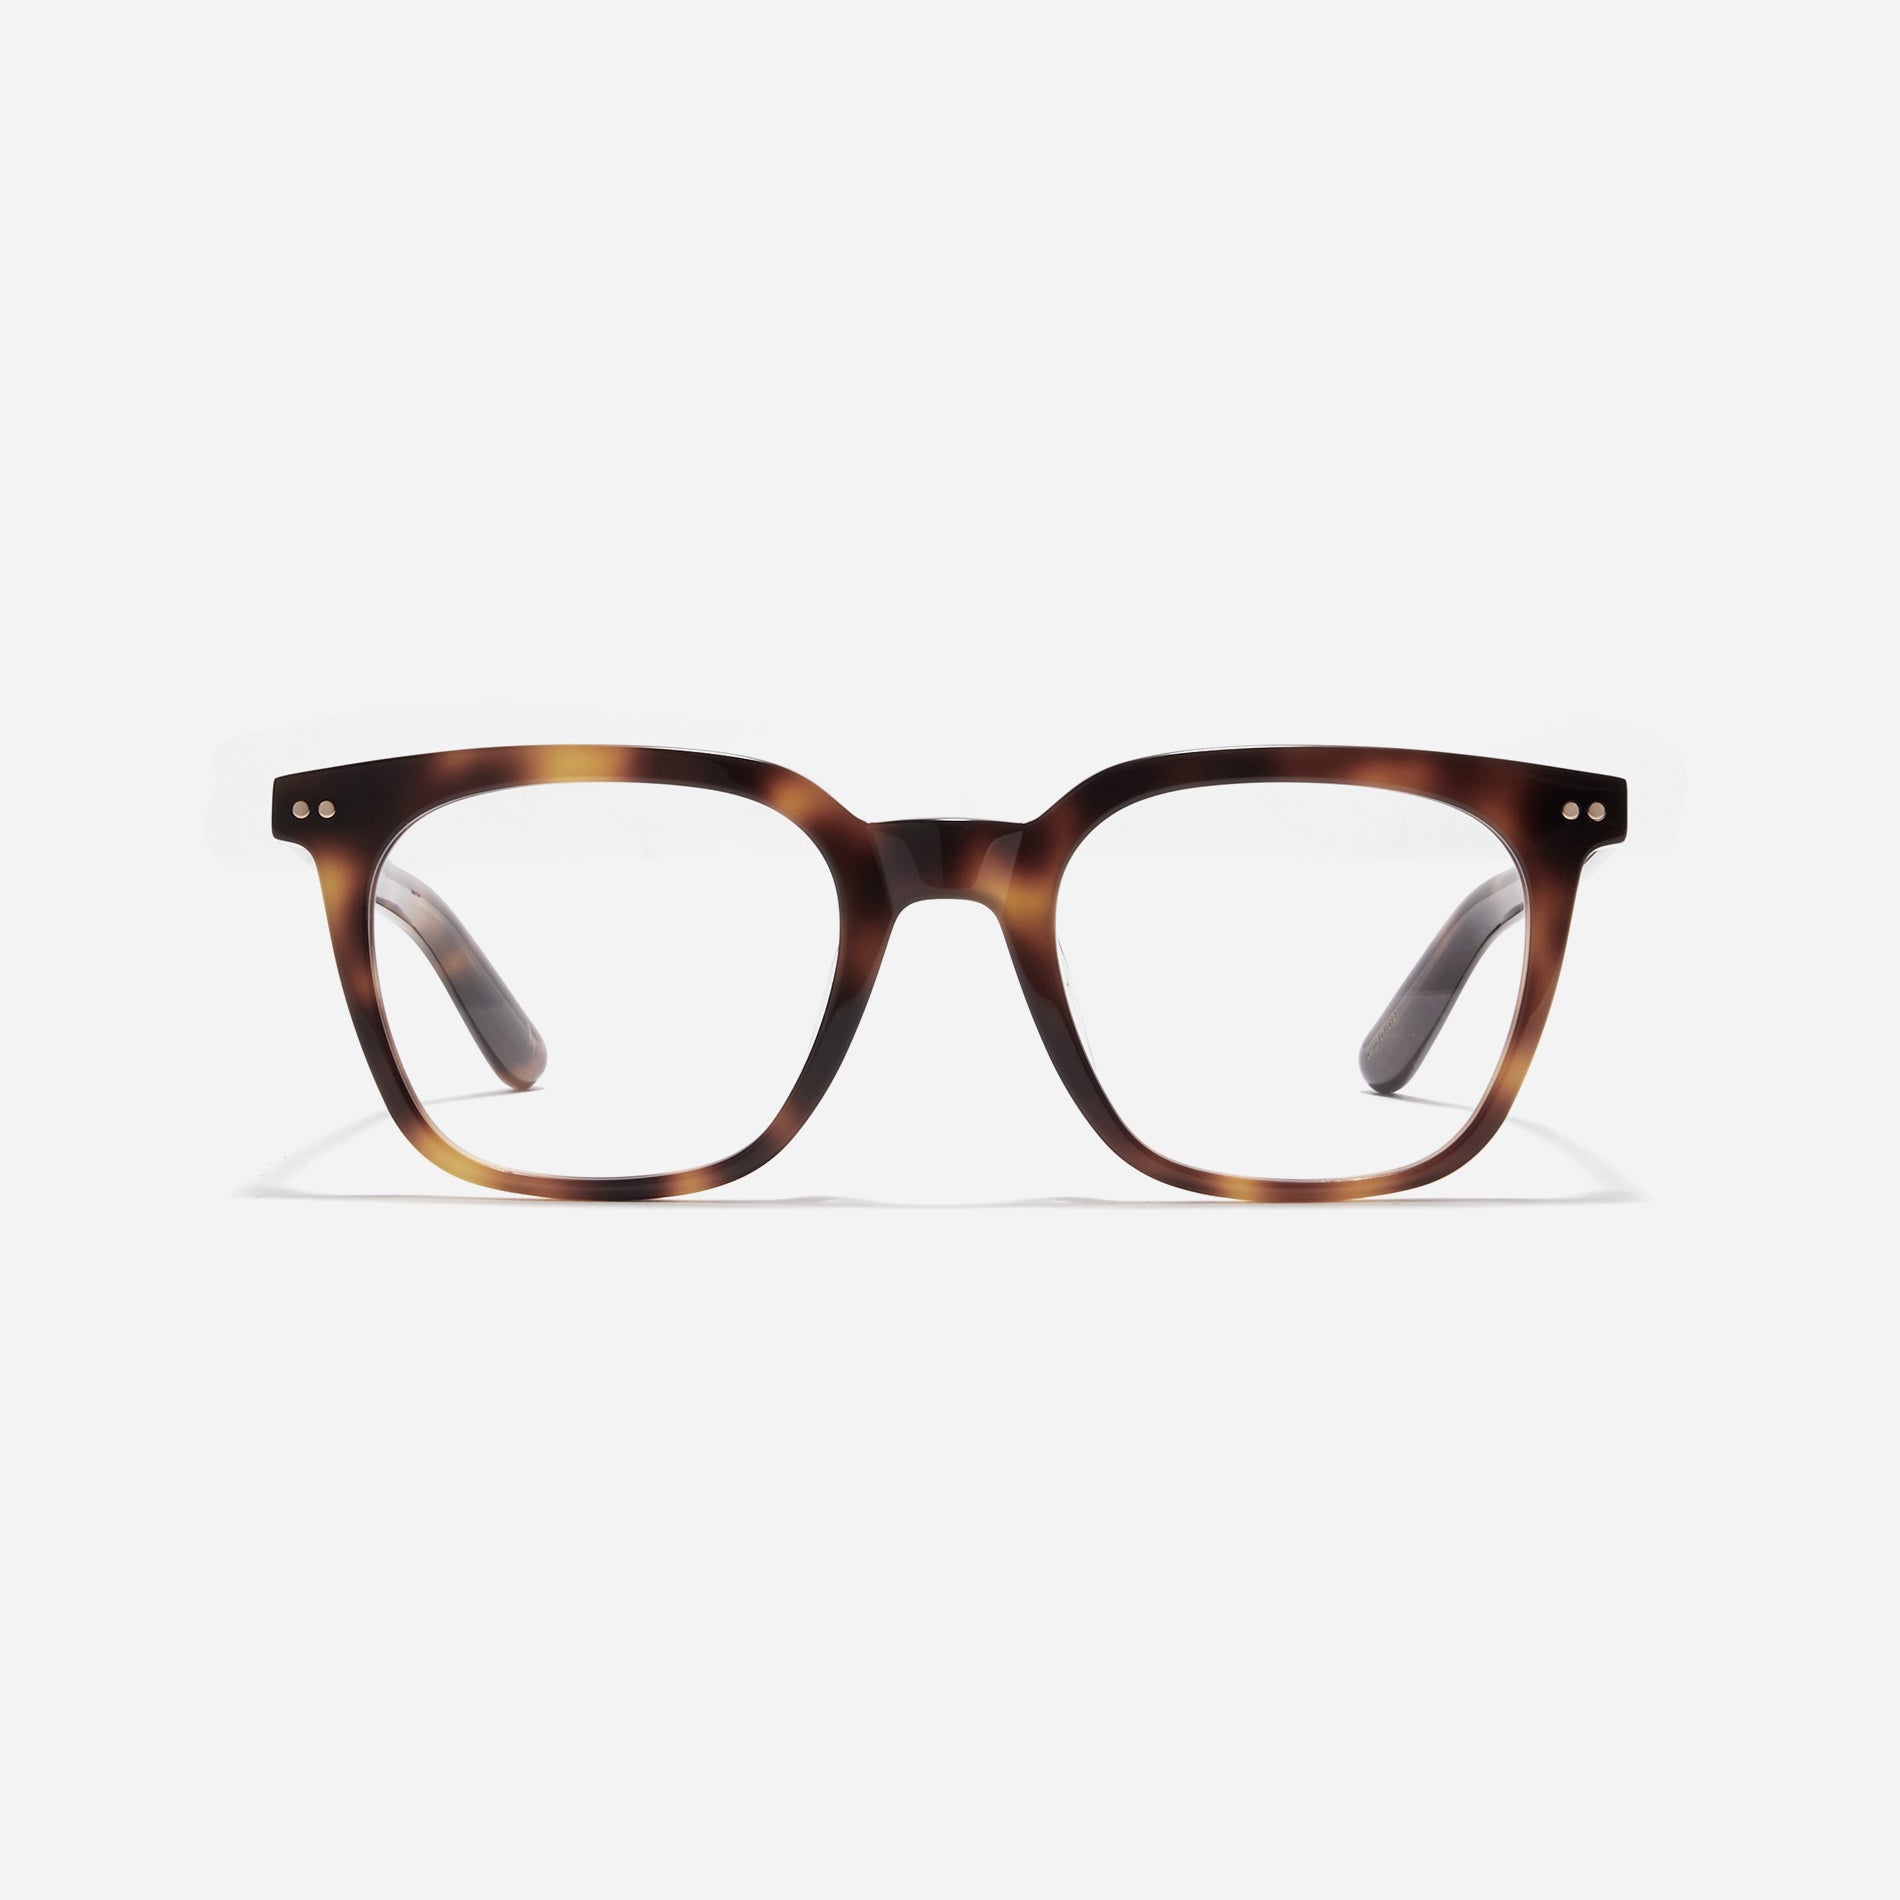 Square-shaped horn-rimmed eyeglasses. Embodying a modern reinterpretation of '91s retro vibes, their design is created for effortless styling. Featuring a distinctive bold frame and a stylish polygonal shape, these eyeglasses are available in a variety of colors.